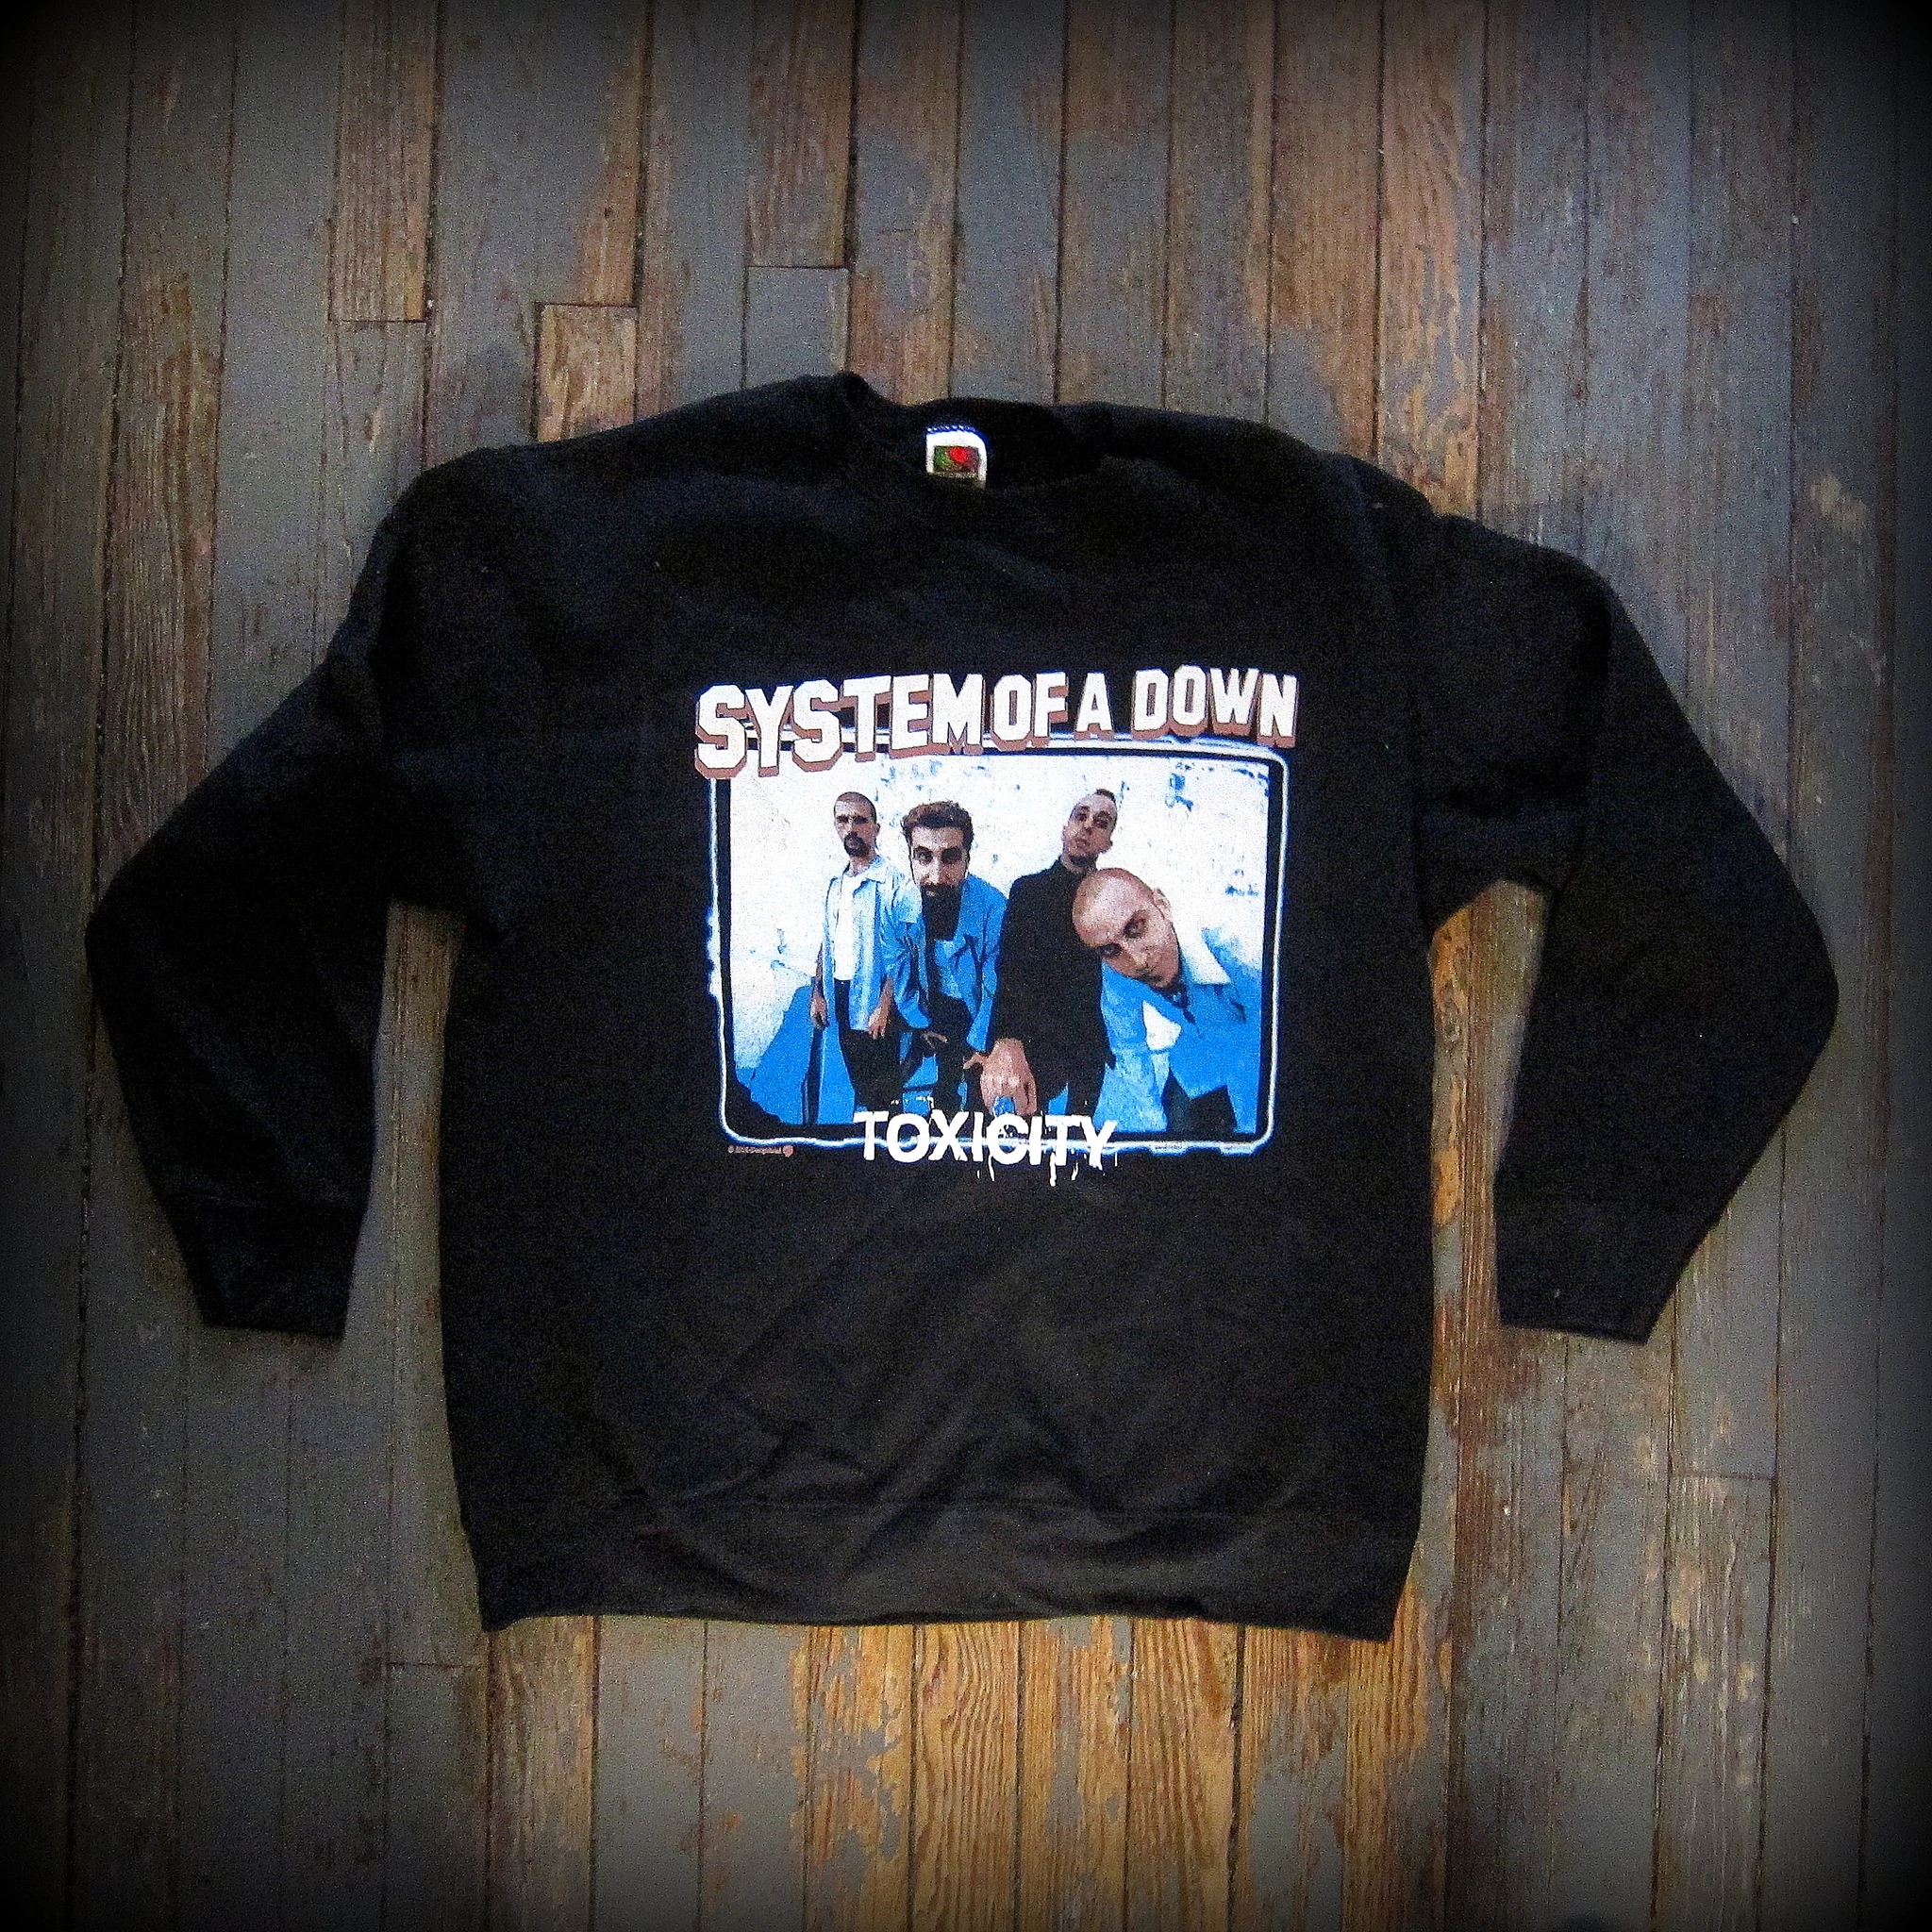 SYSTEM OF A DOWN - Toxicity - Sweatshirt